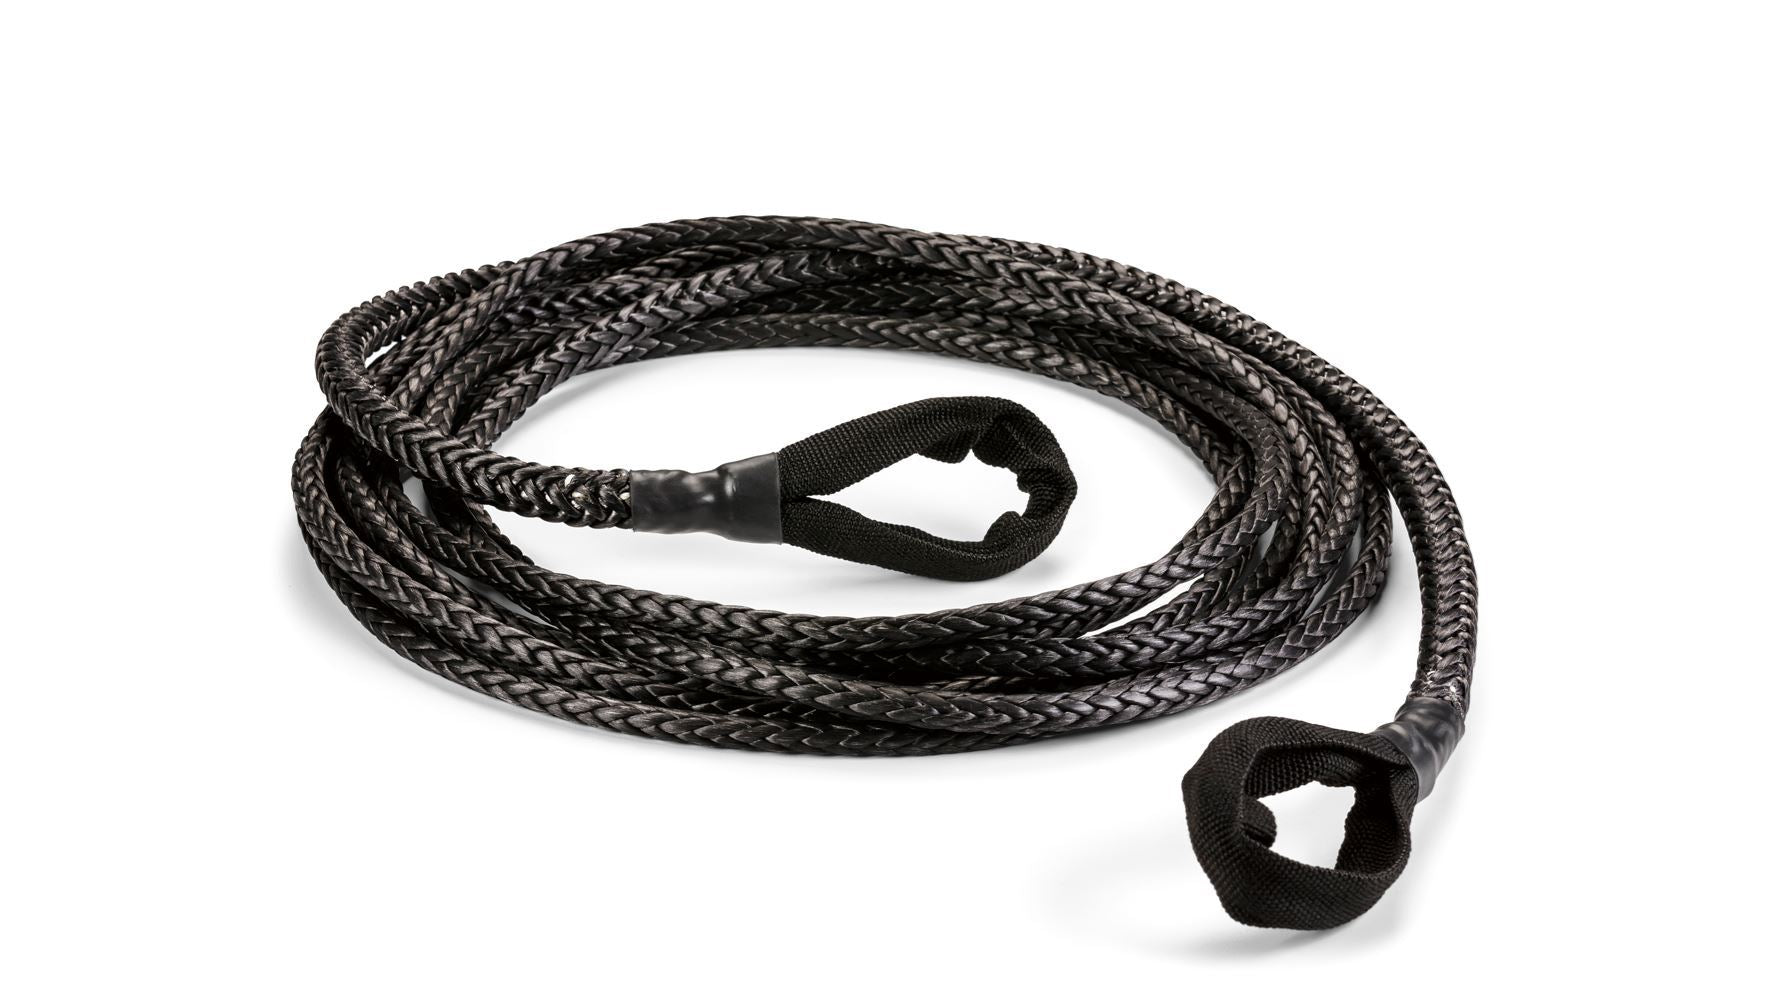 WARN Spydura Synthetic Winch Rope Extension, 25ft x 3/8in